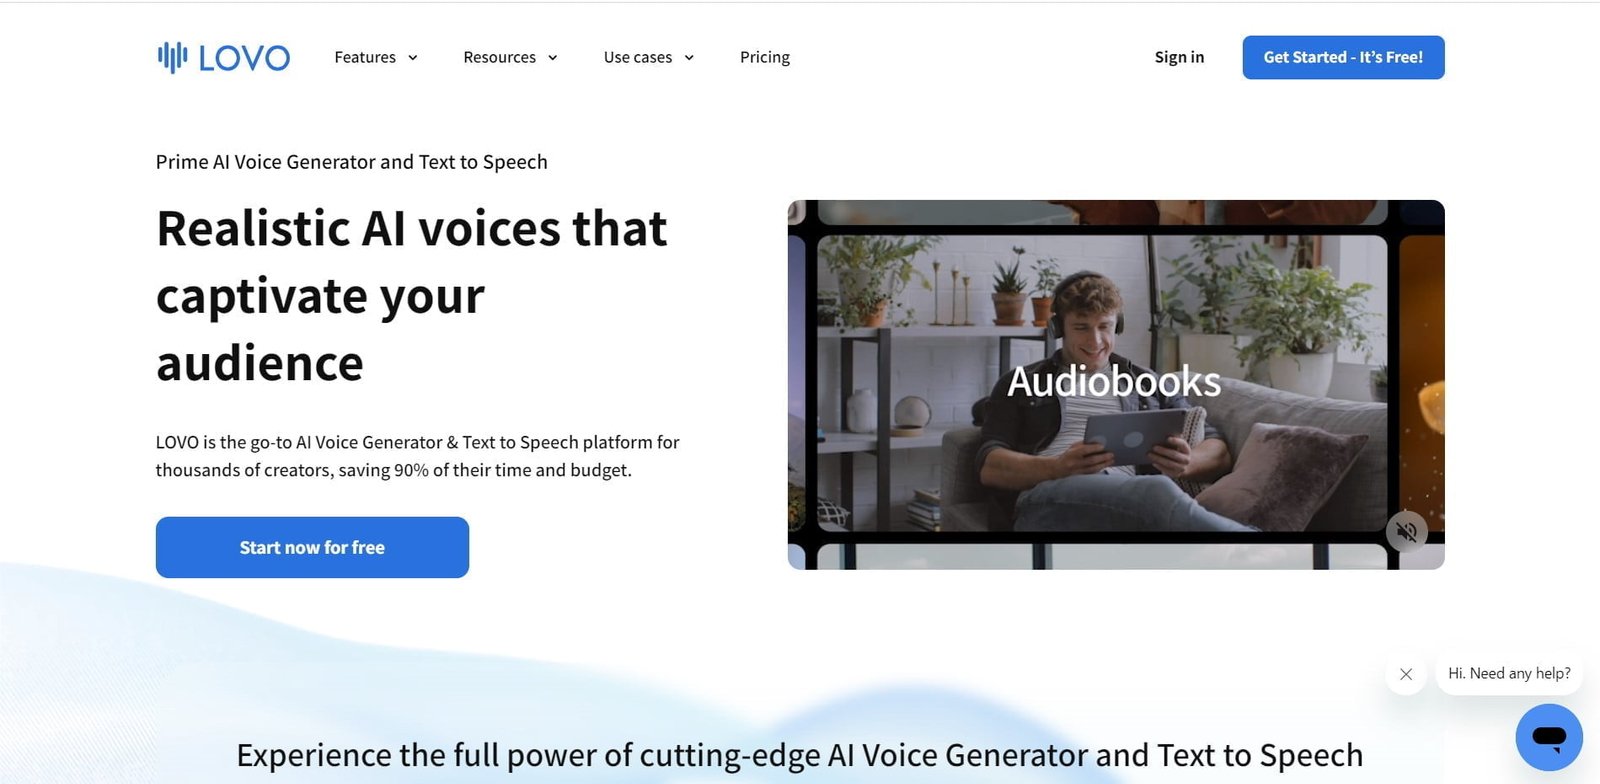 Lovo is an AI voice generator and text-to-speech platform designed to help creators produce high-quality audio content for various purposes.